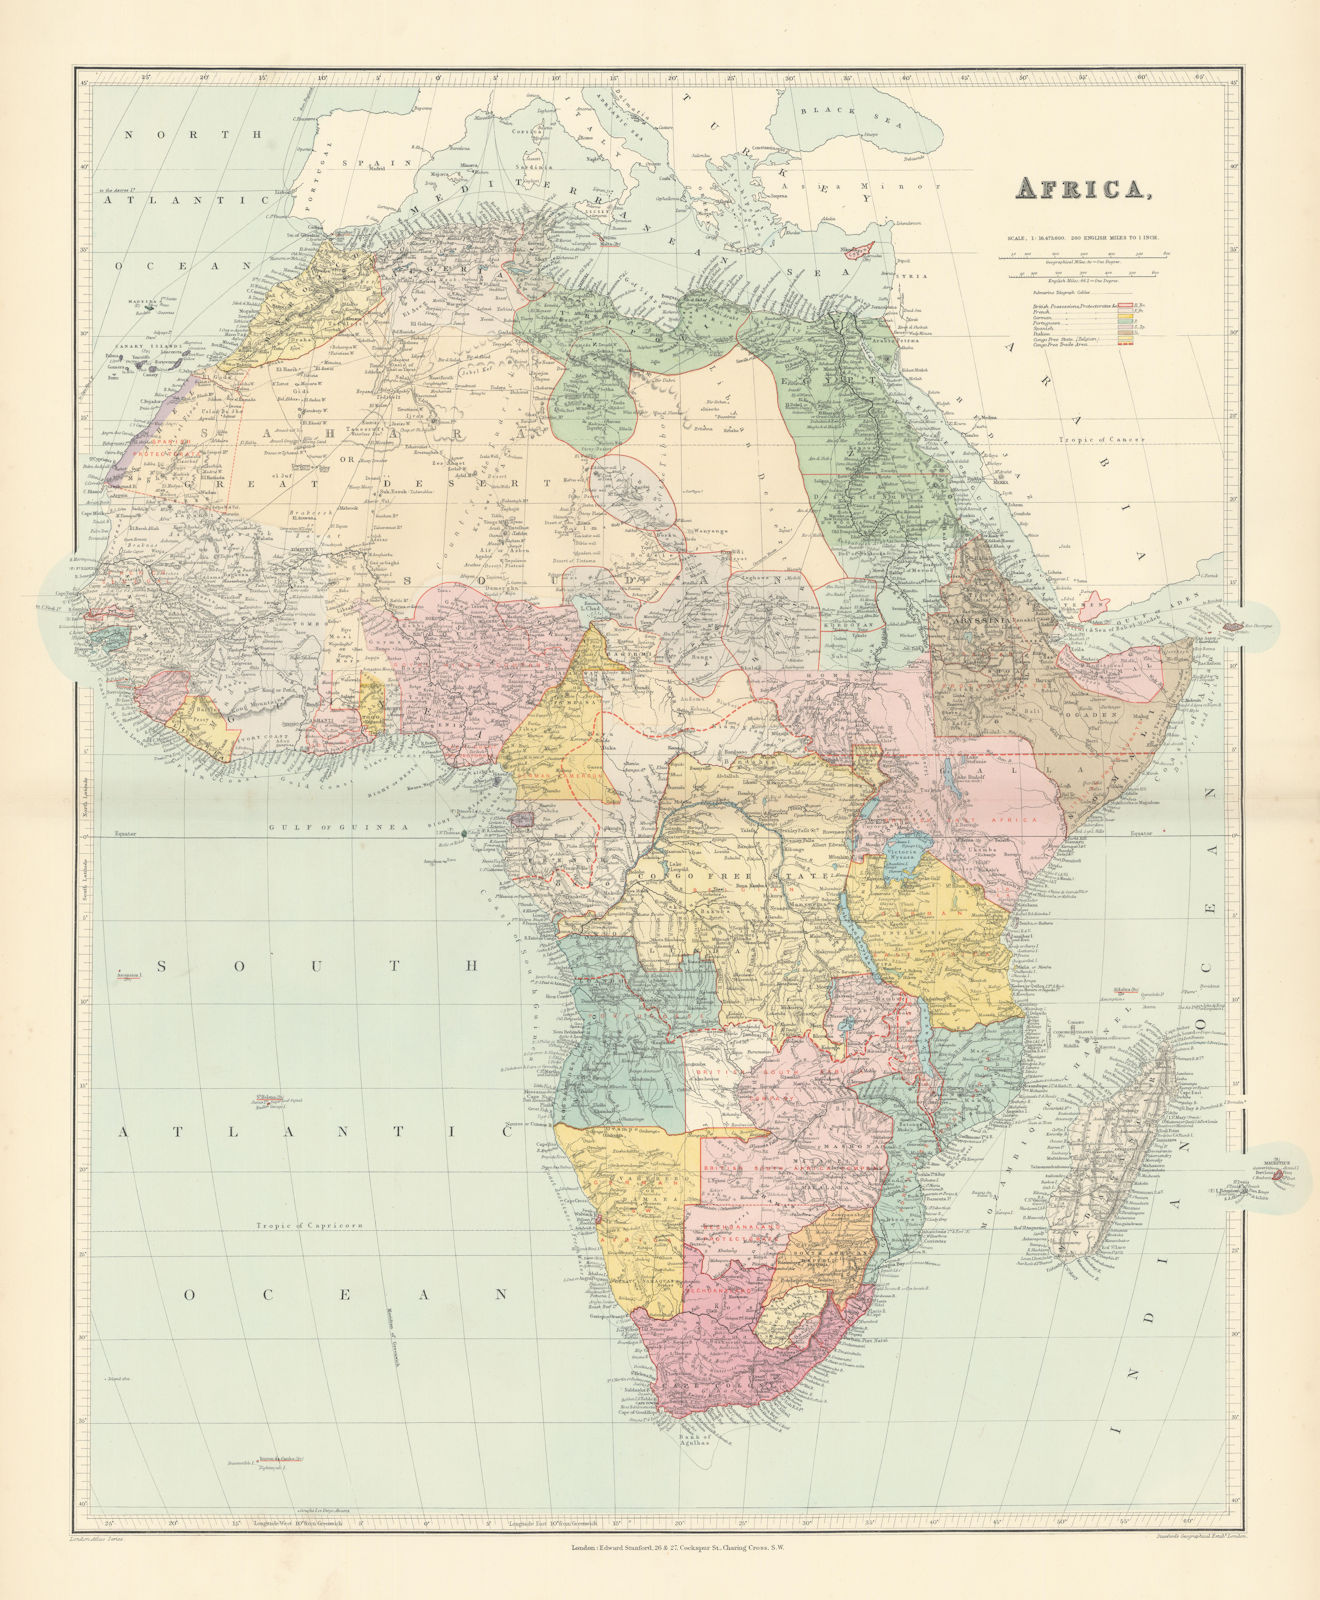 Associate Product Africa. Congo Free Trade Area. British South Africa Company. STANFORD 1896 map